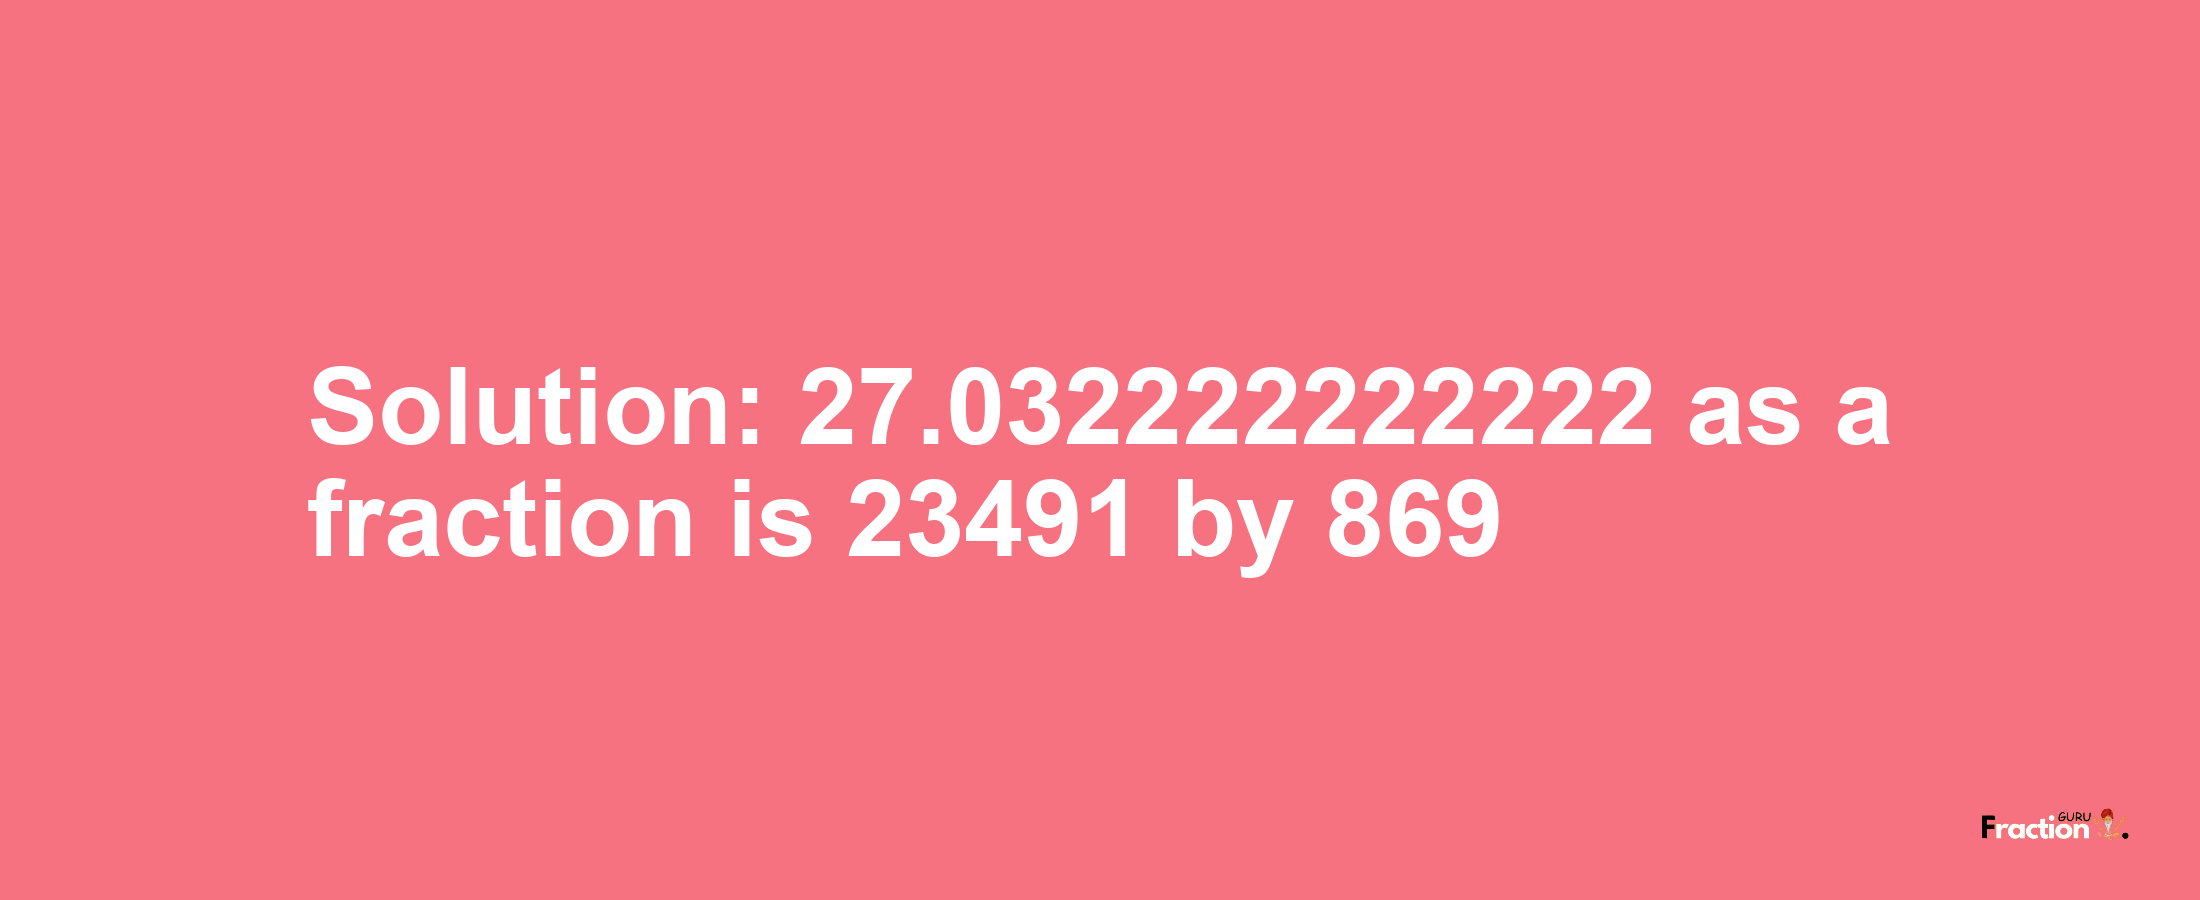 Solution:27.032222222222 as a fraction is 23491/869